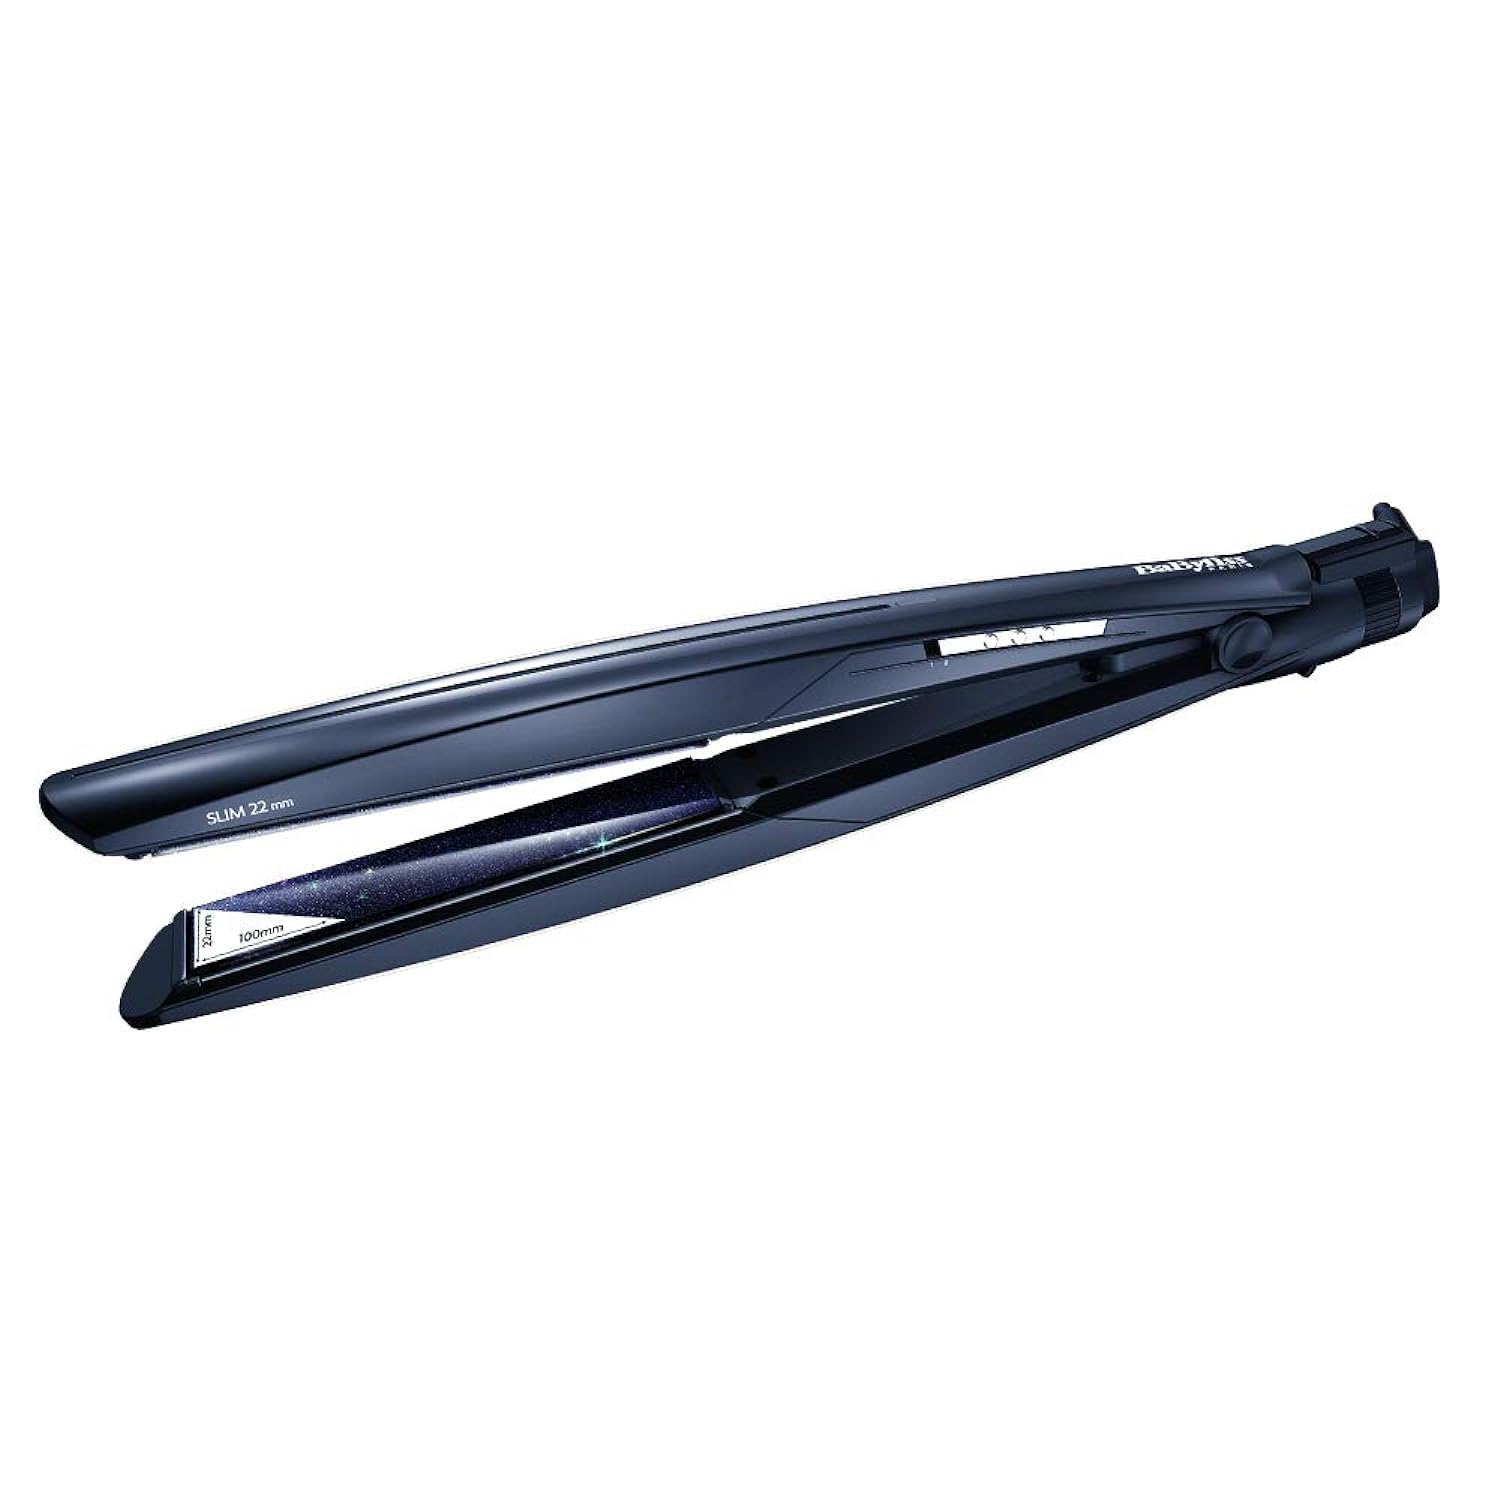 BaByliss Hair Straightener | Protect Straightener With Black Finish For Sleek Styling | Ultra-fast Heat-up Time For Quick Usage | Auto Shut-off Safety Feature For Peace Of Mind | ST325SDE(Black), One Size